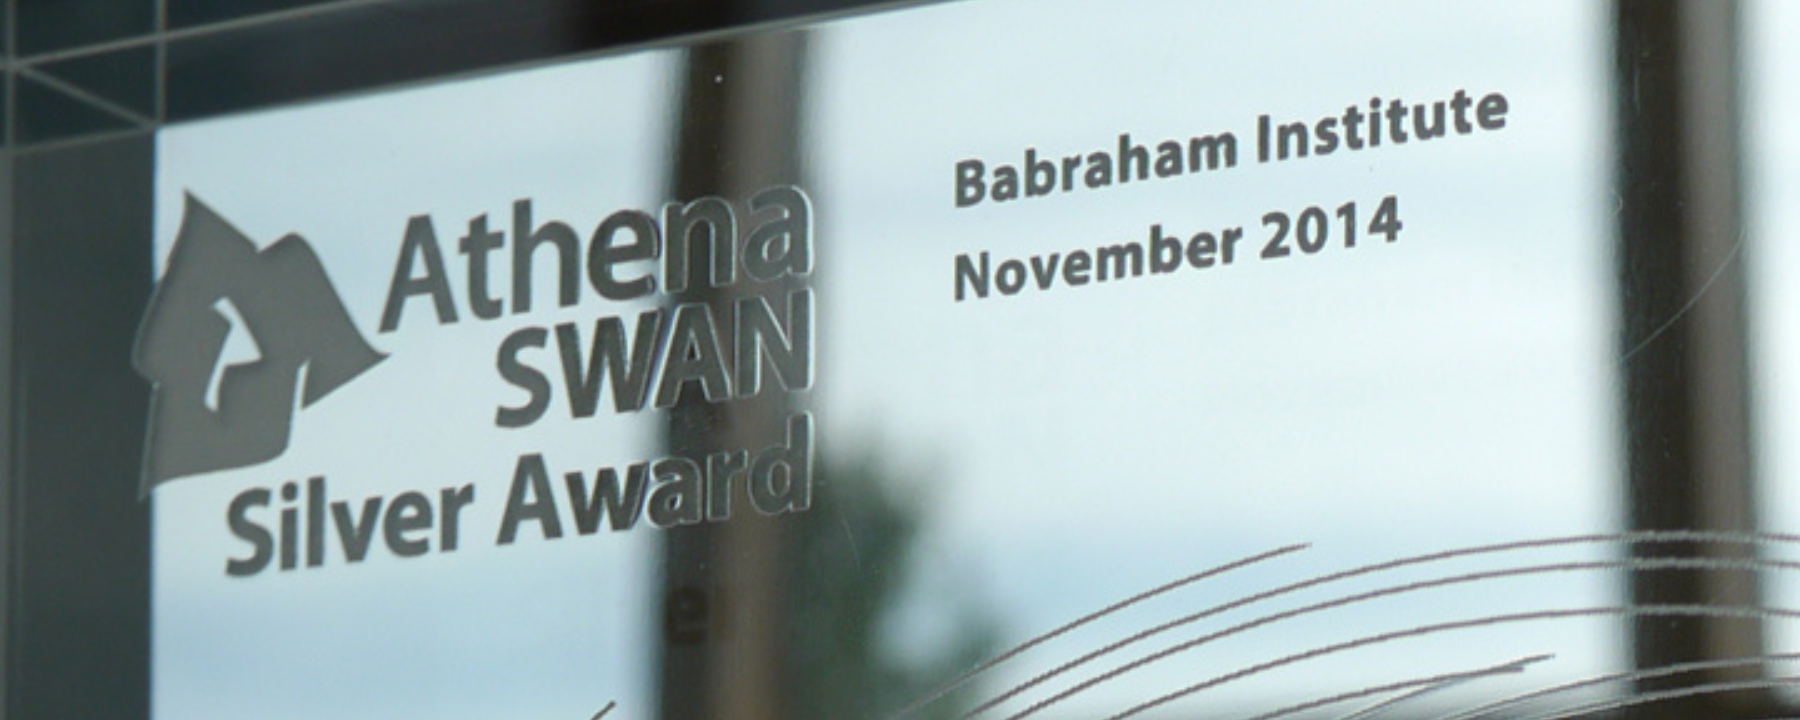 Photo of the ̨swag's Athena SWAN Silver Award from 2014